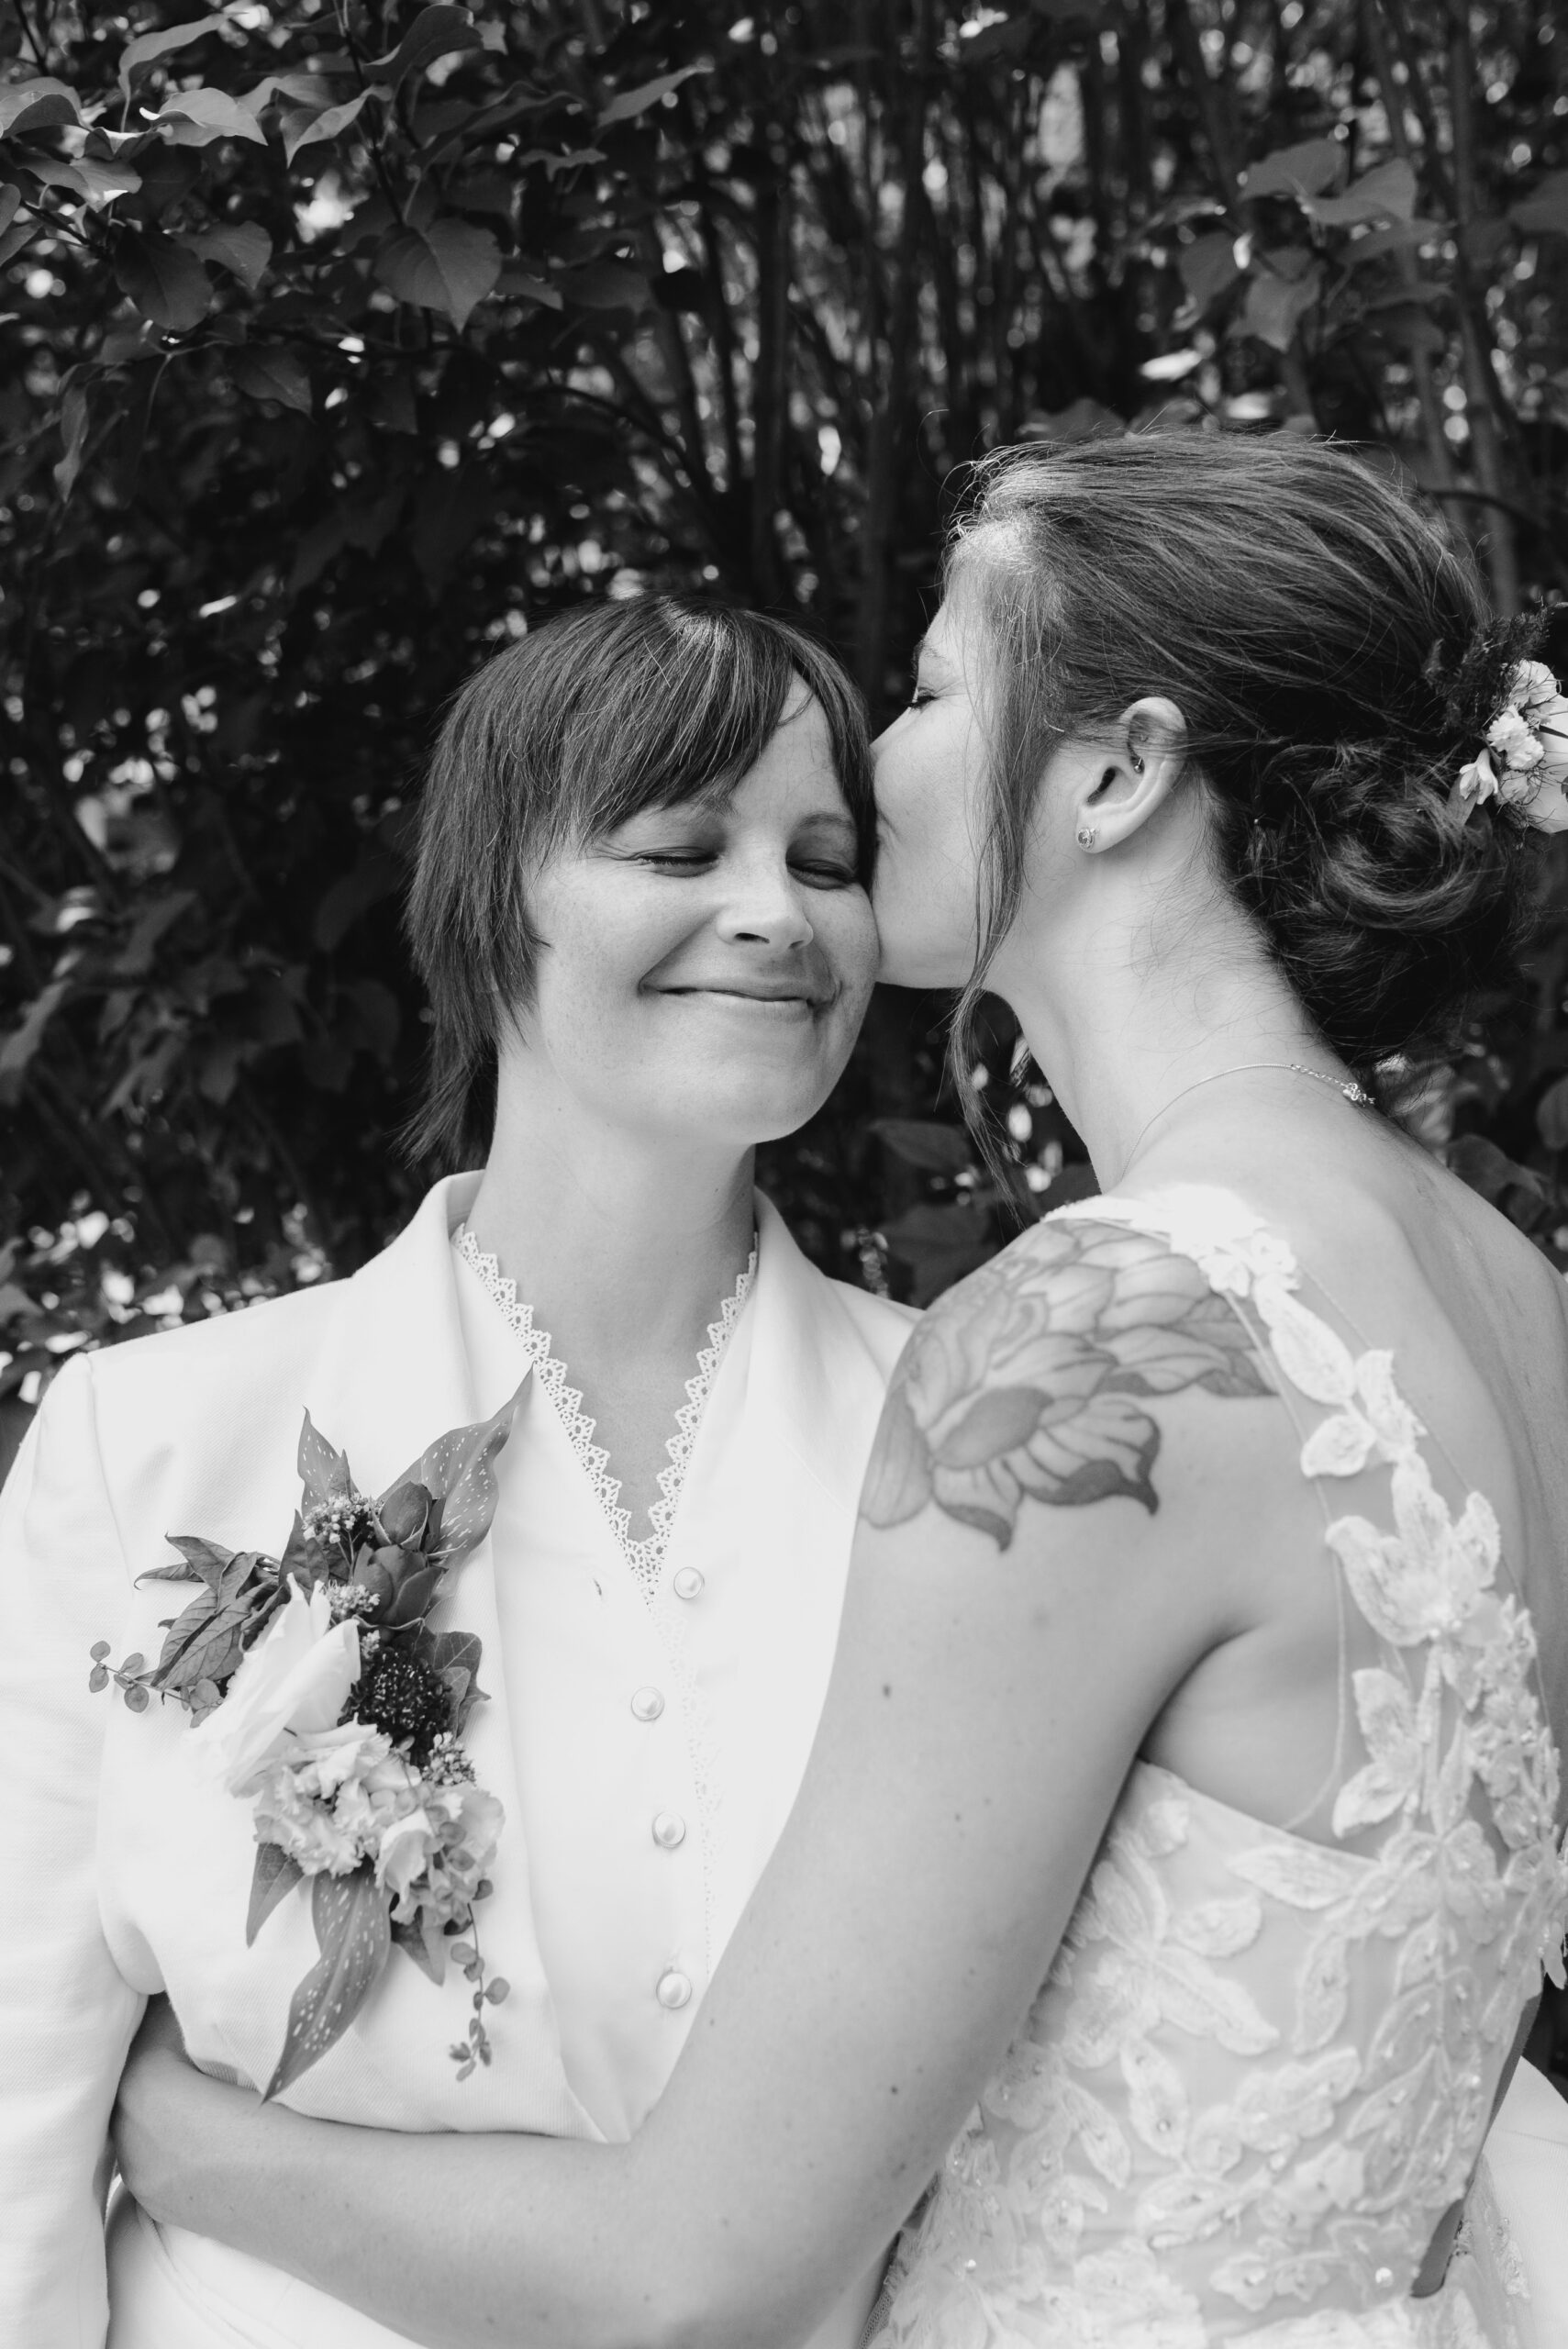 Black and white image of two brides kissing queer couple two brides queer wedding photography Grand Rapids based queer wedding photographer Liv Lyszyk photography based in grand Rapids grand Rapids queer couples photography for queer couples photography for brides